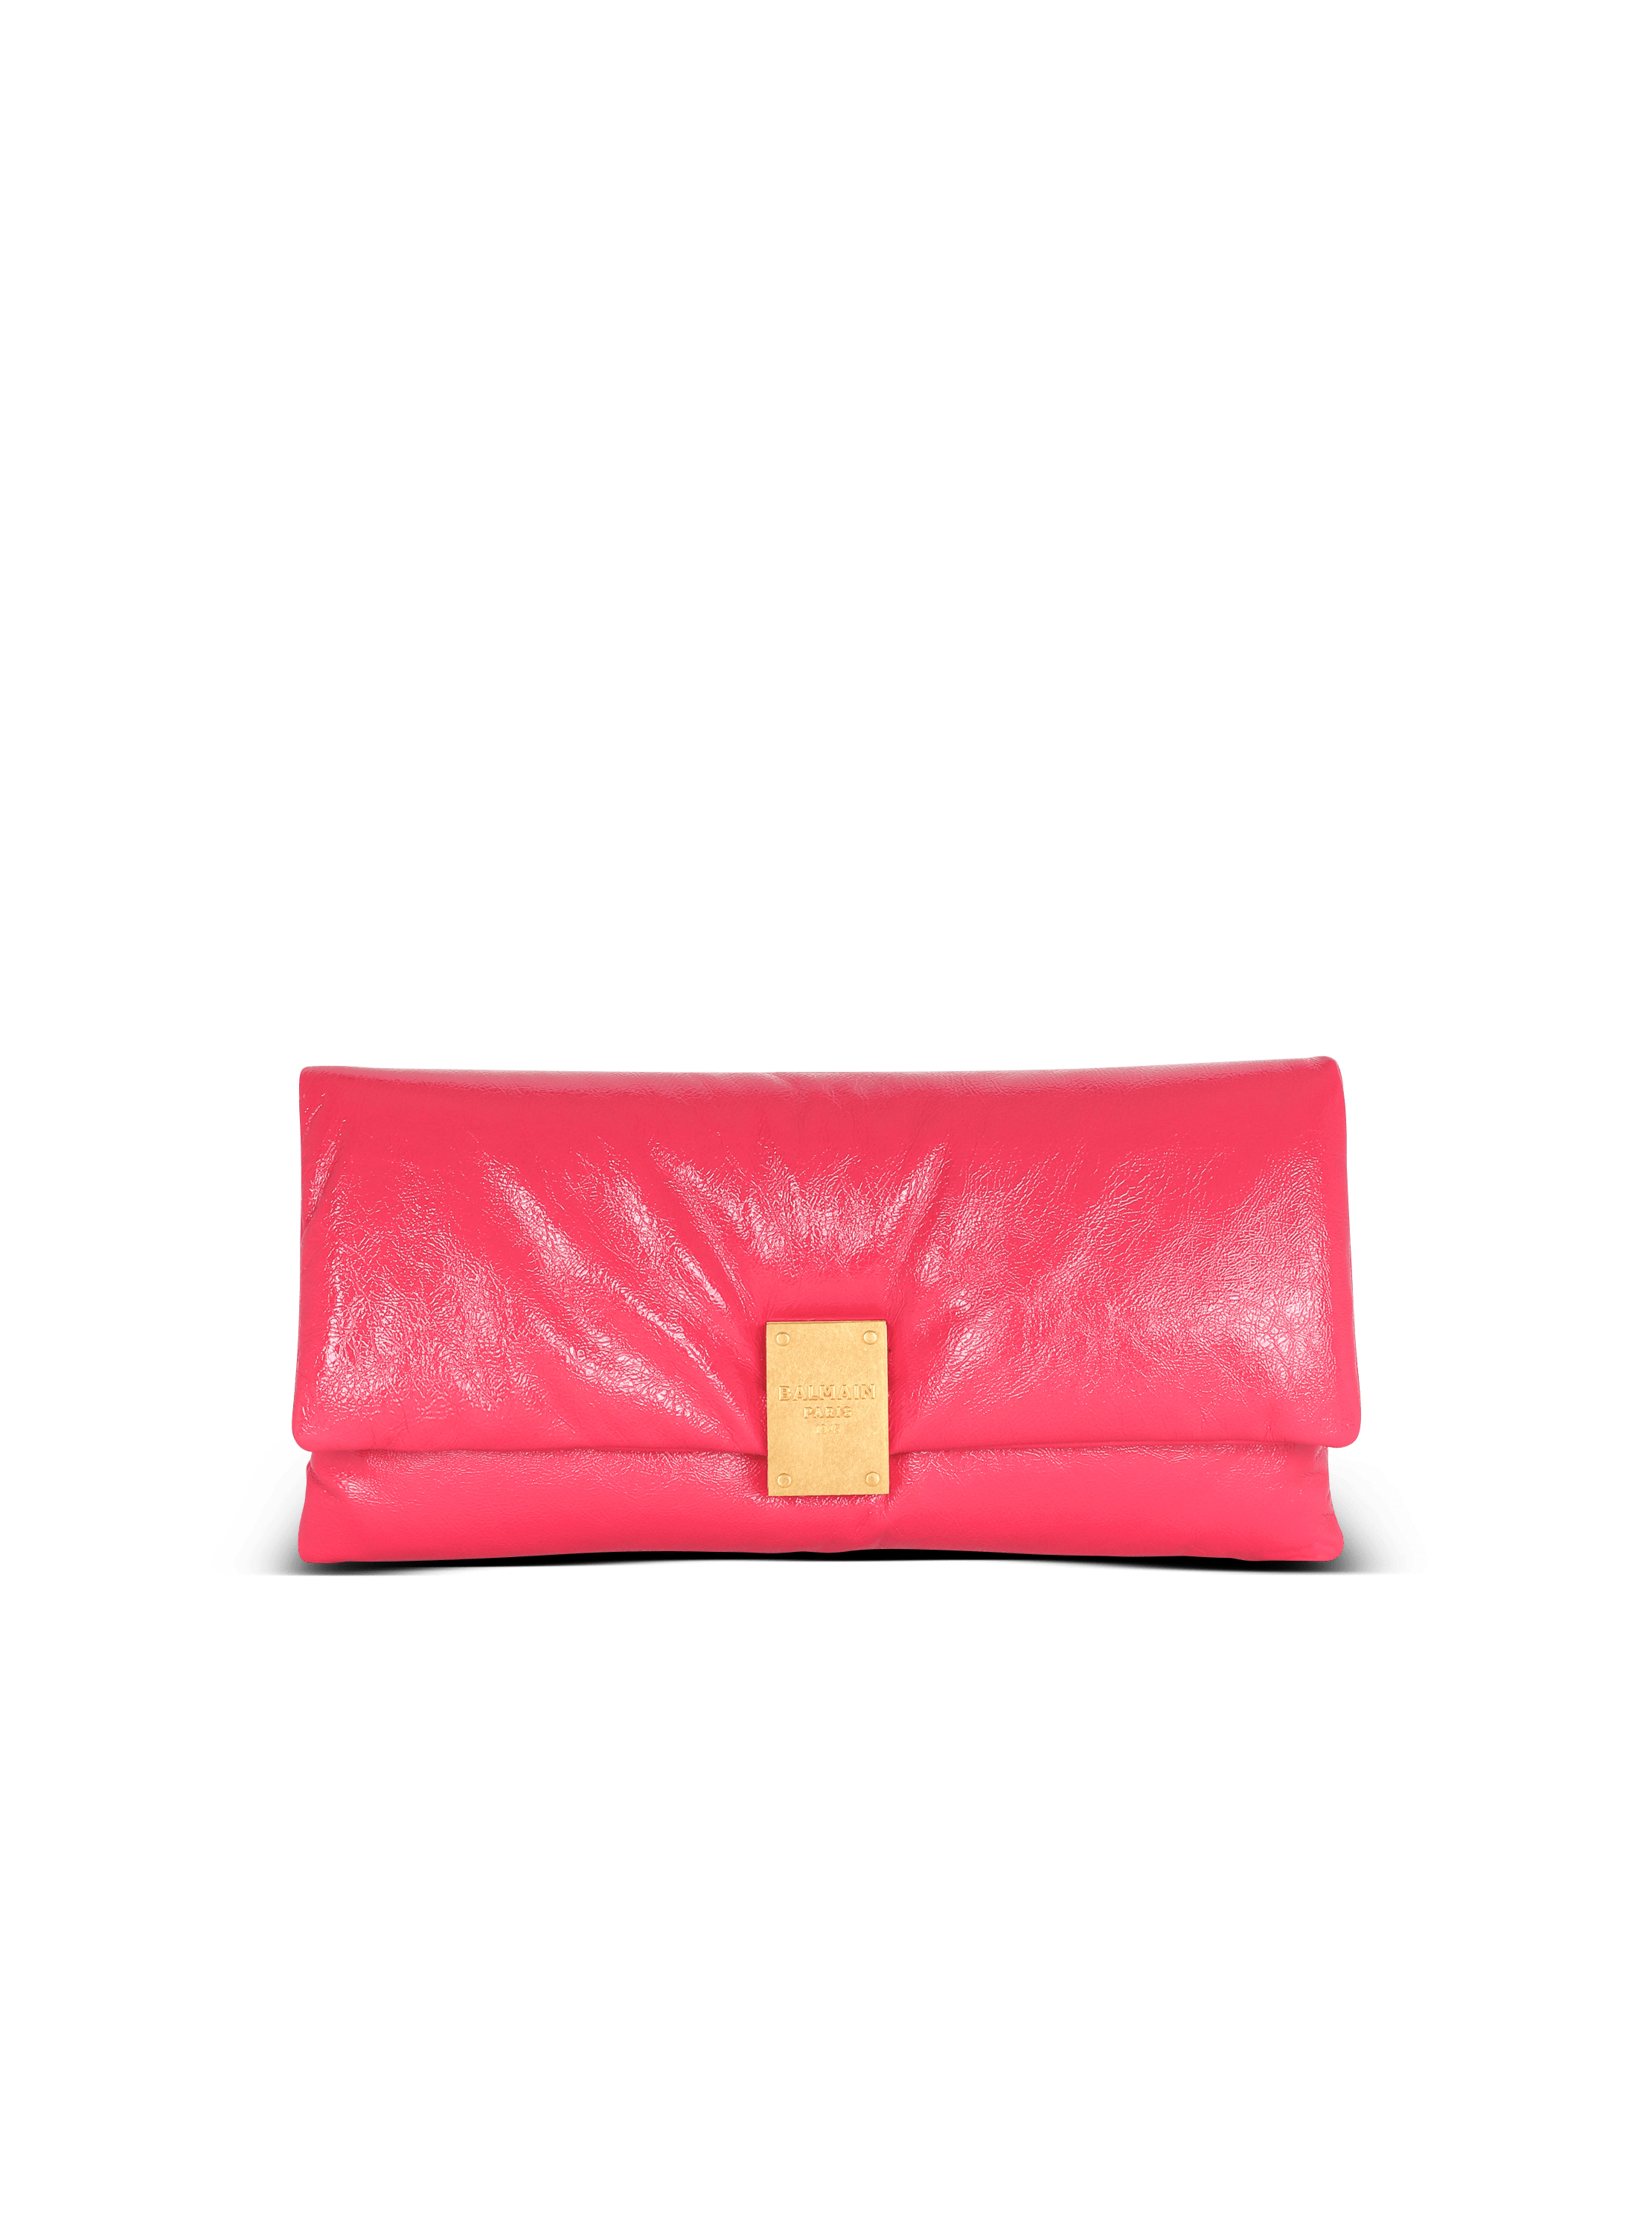 1945 Soft patent leather clutch pink - Women